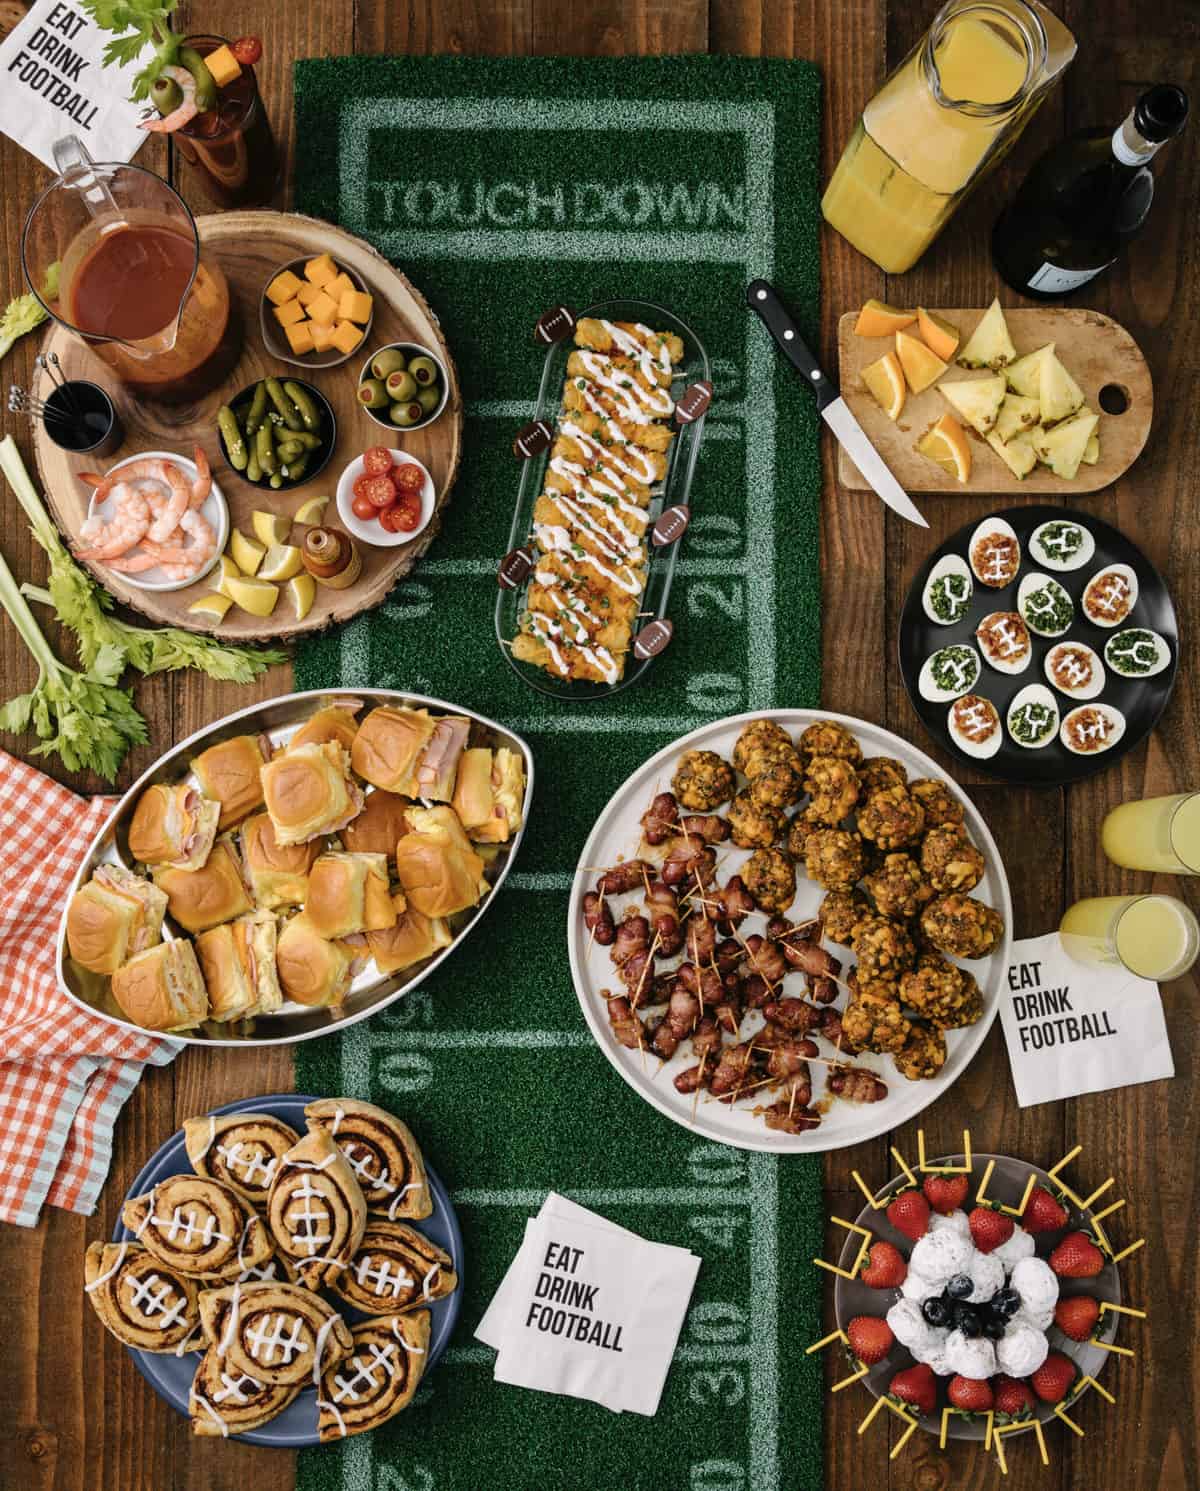 Tailgate Brunch Spread by The BakerMama